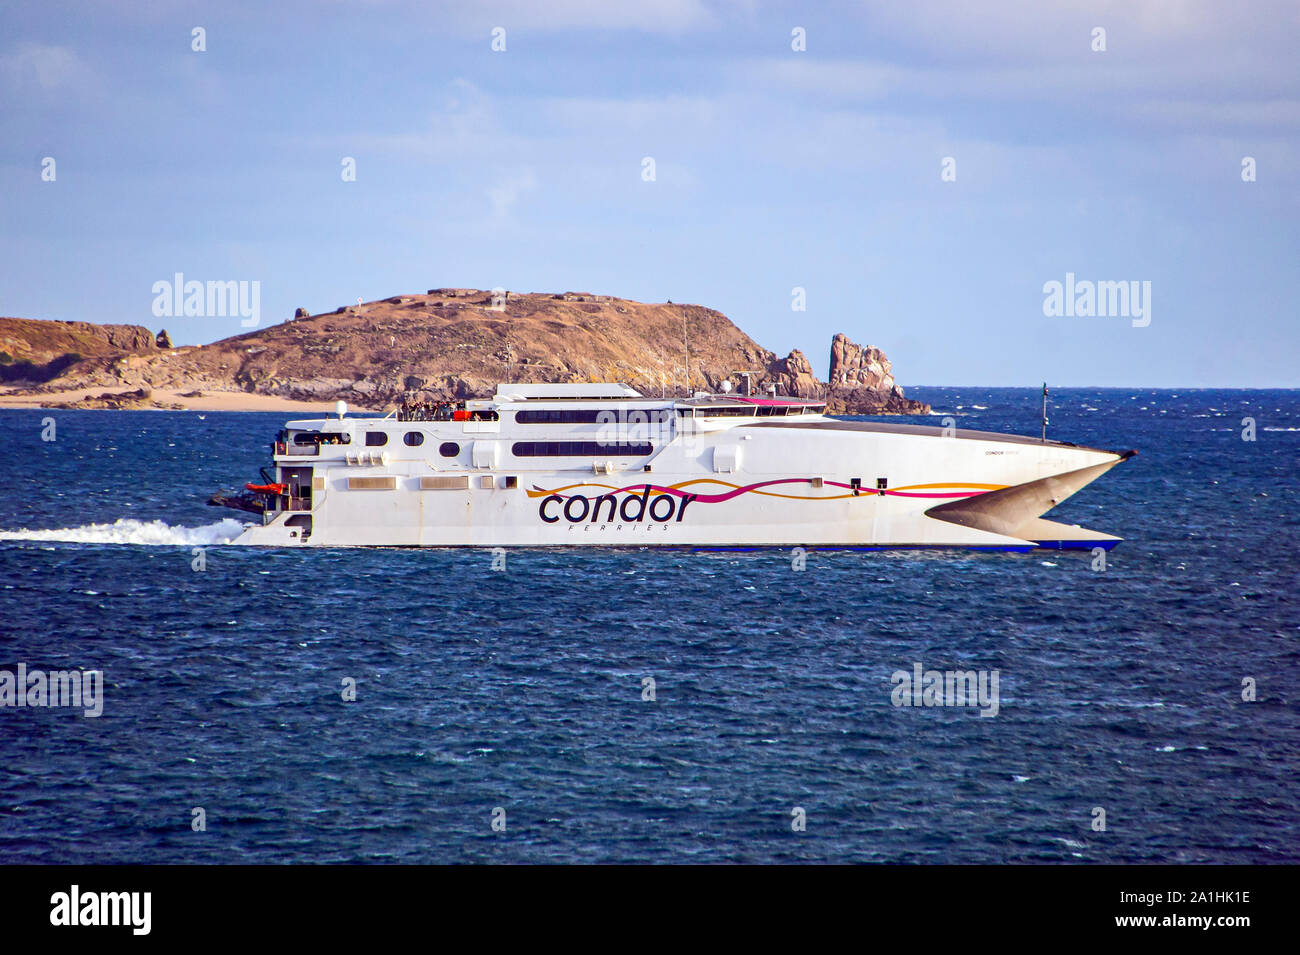 St Malo Ferry High Resolution Stock Photography and Images - Alamy